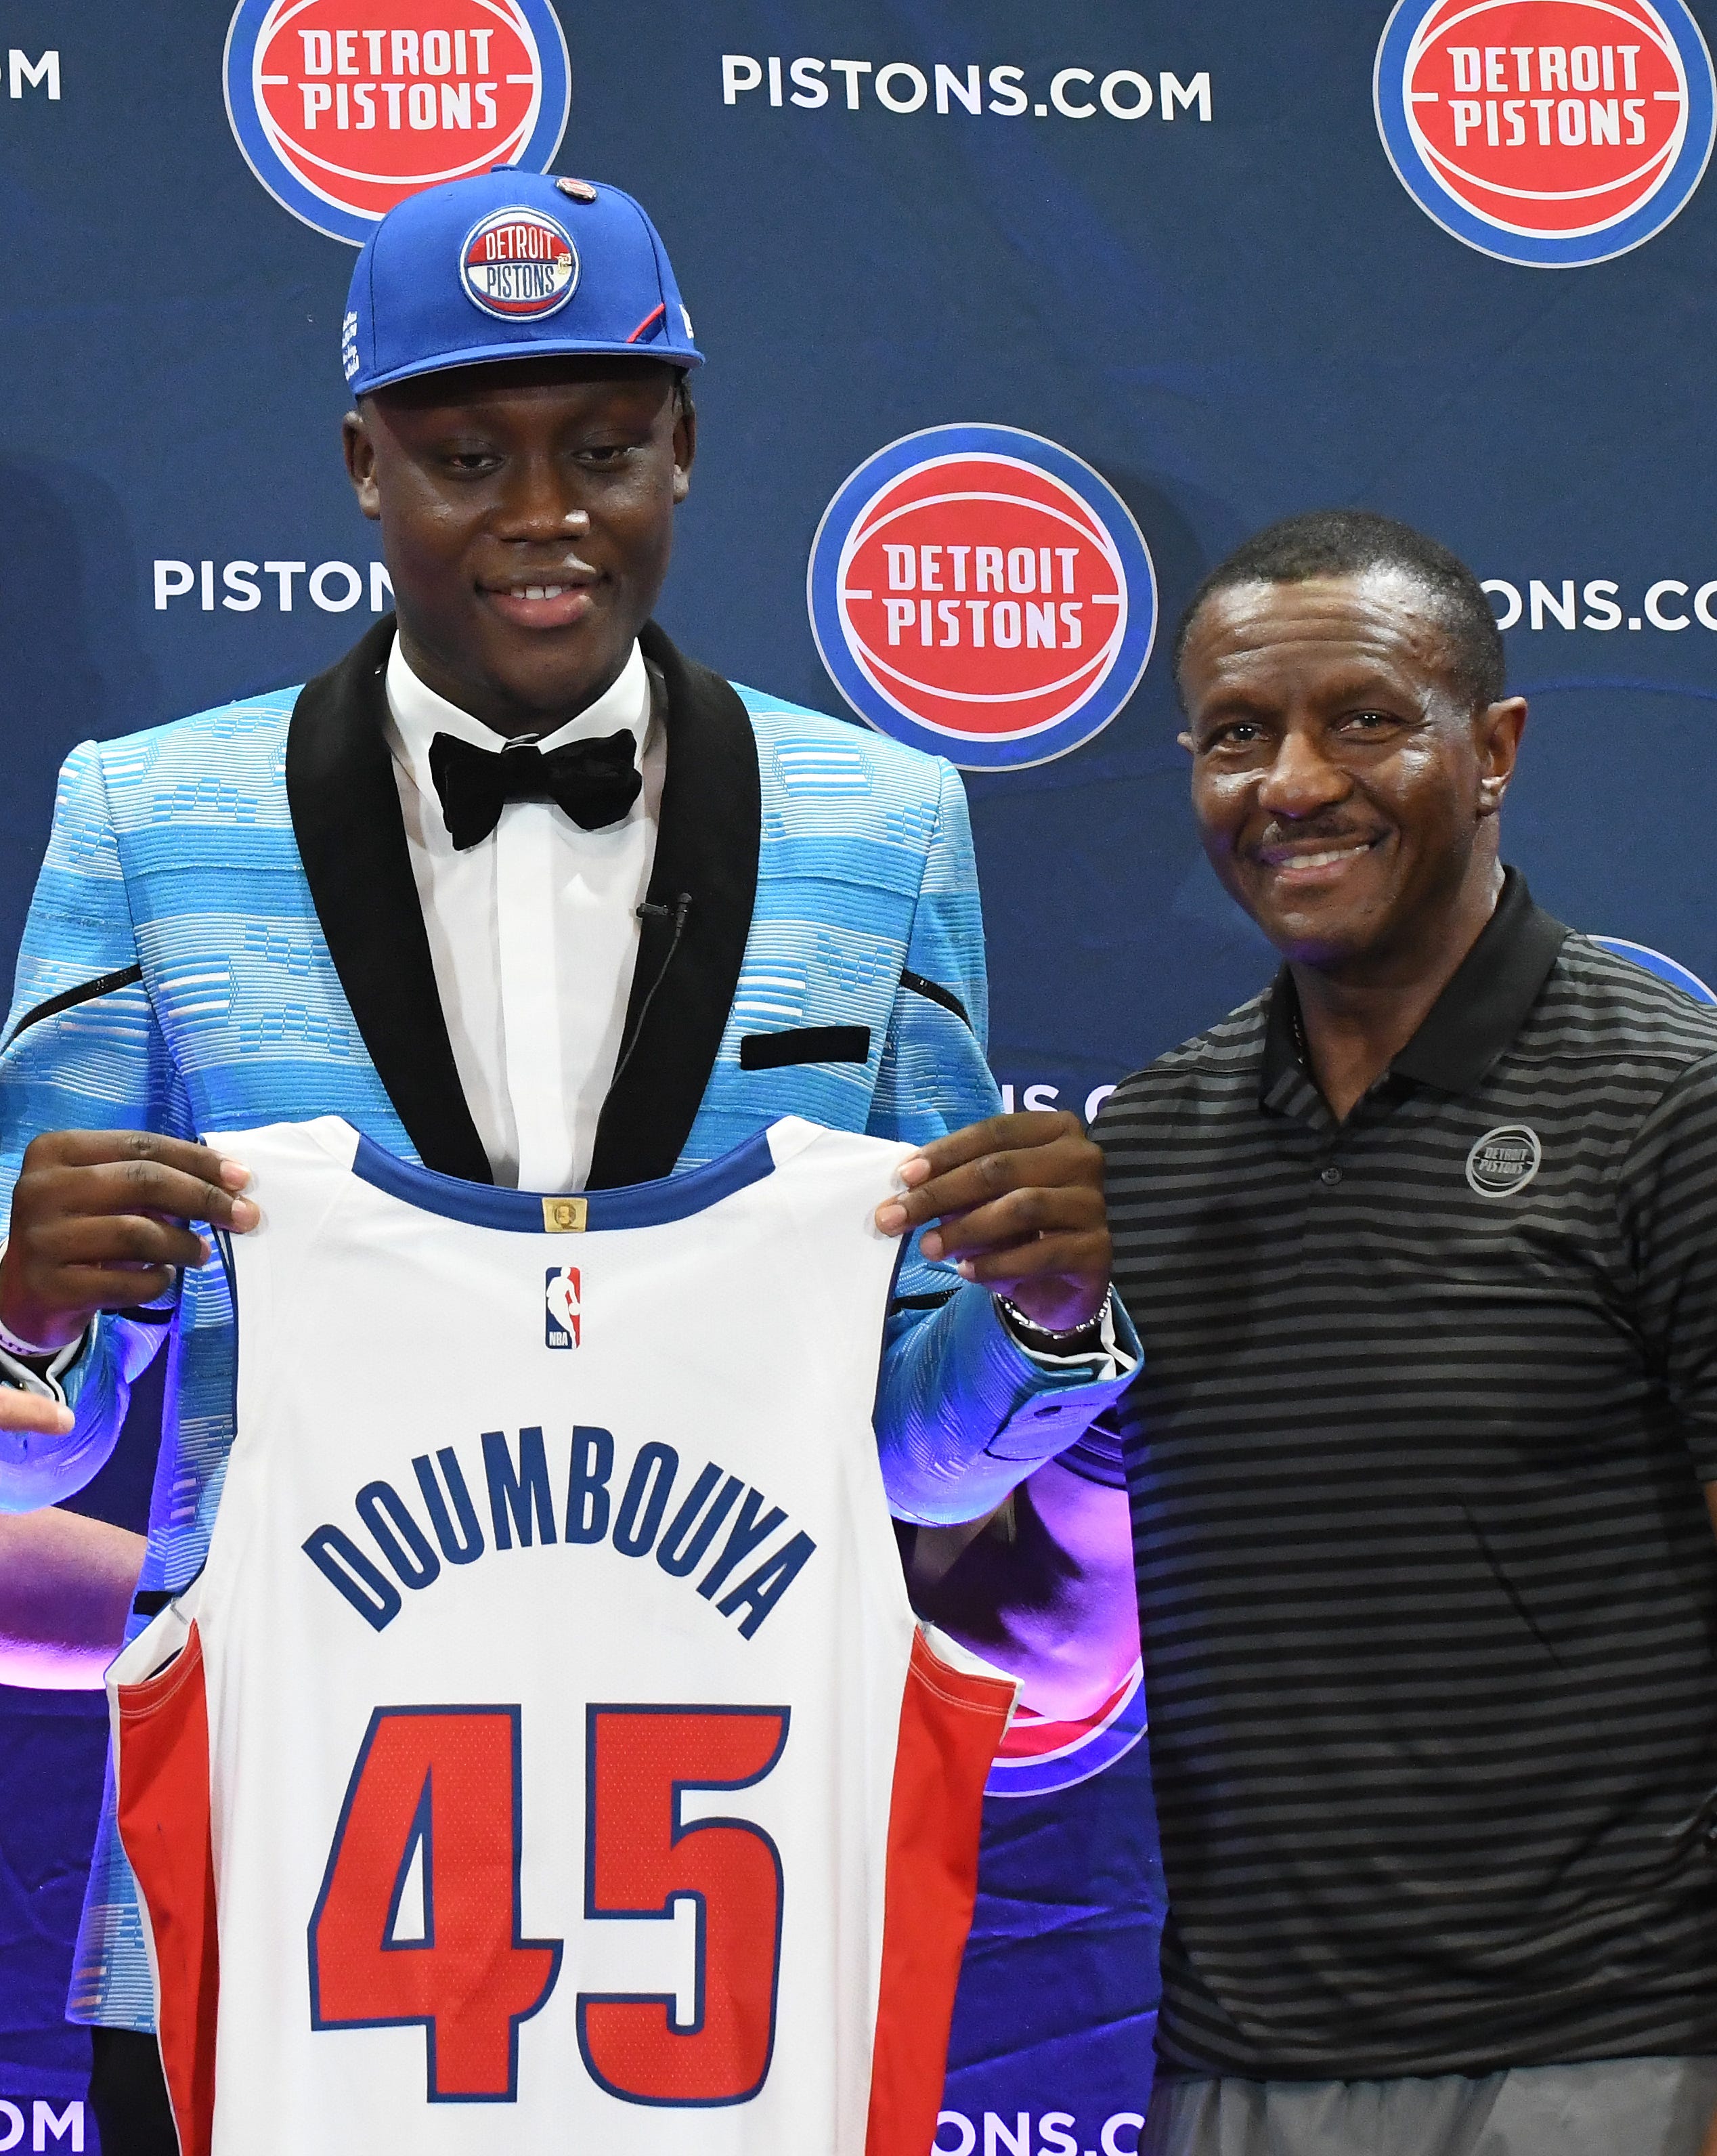 Pistons first round pick Sekou Doumbouya and Pistons head coach Dwane Casey during the press conference.